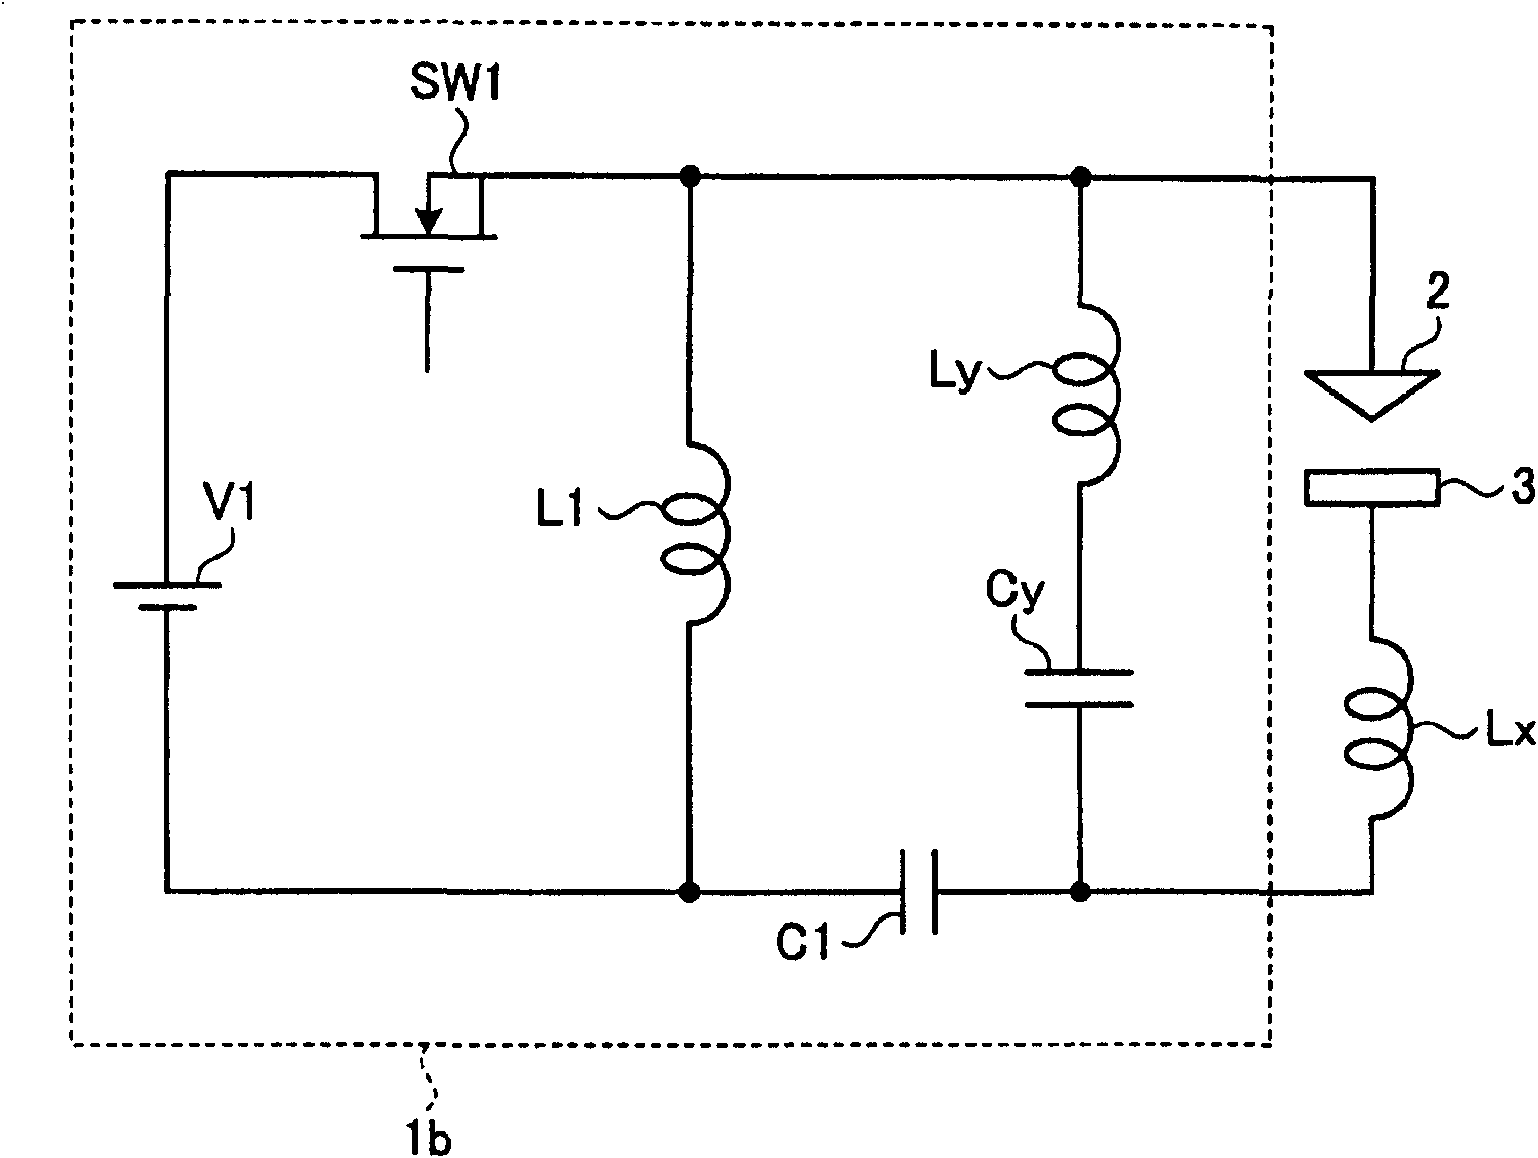 Power supply device for electric discharge machine